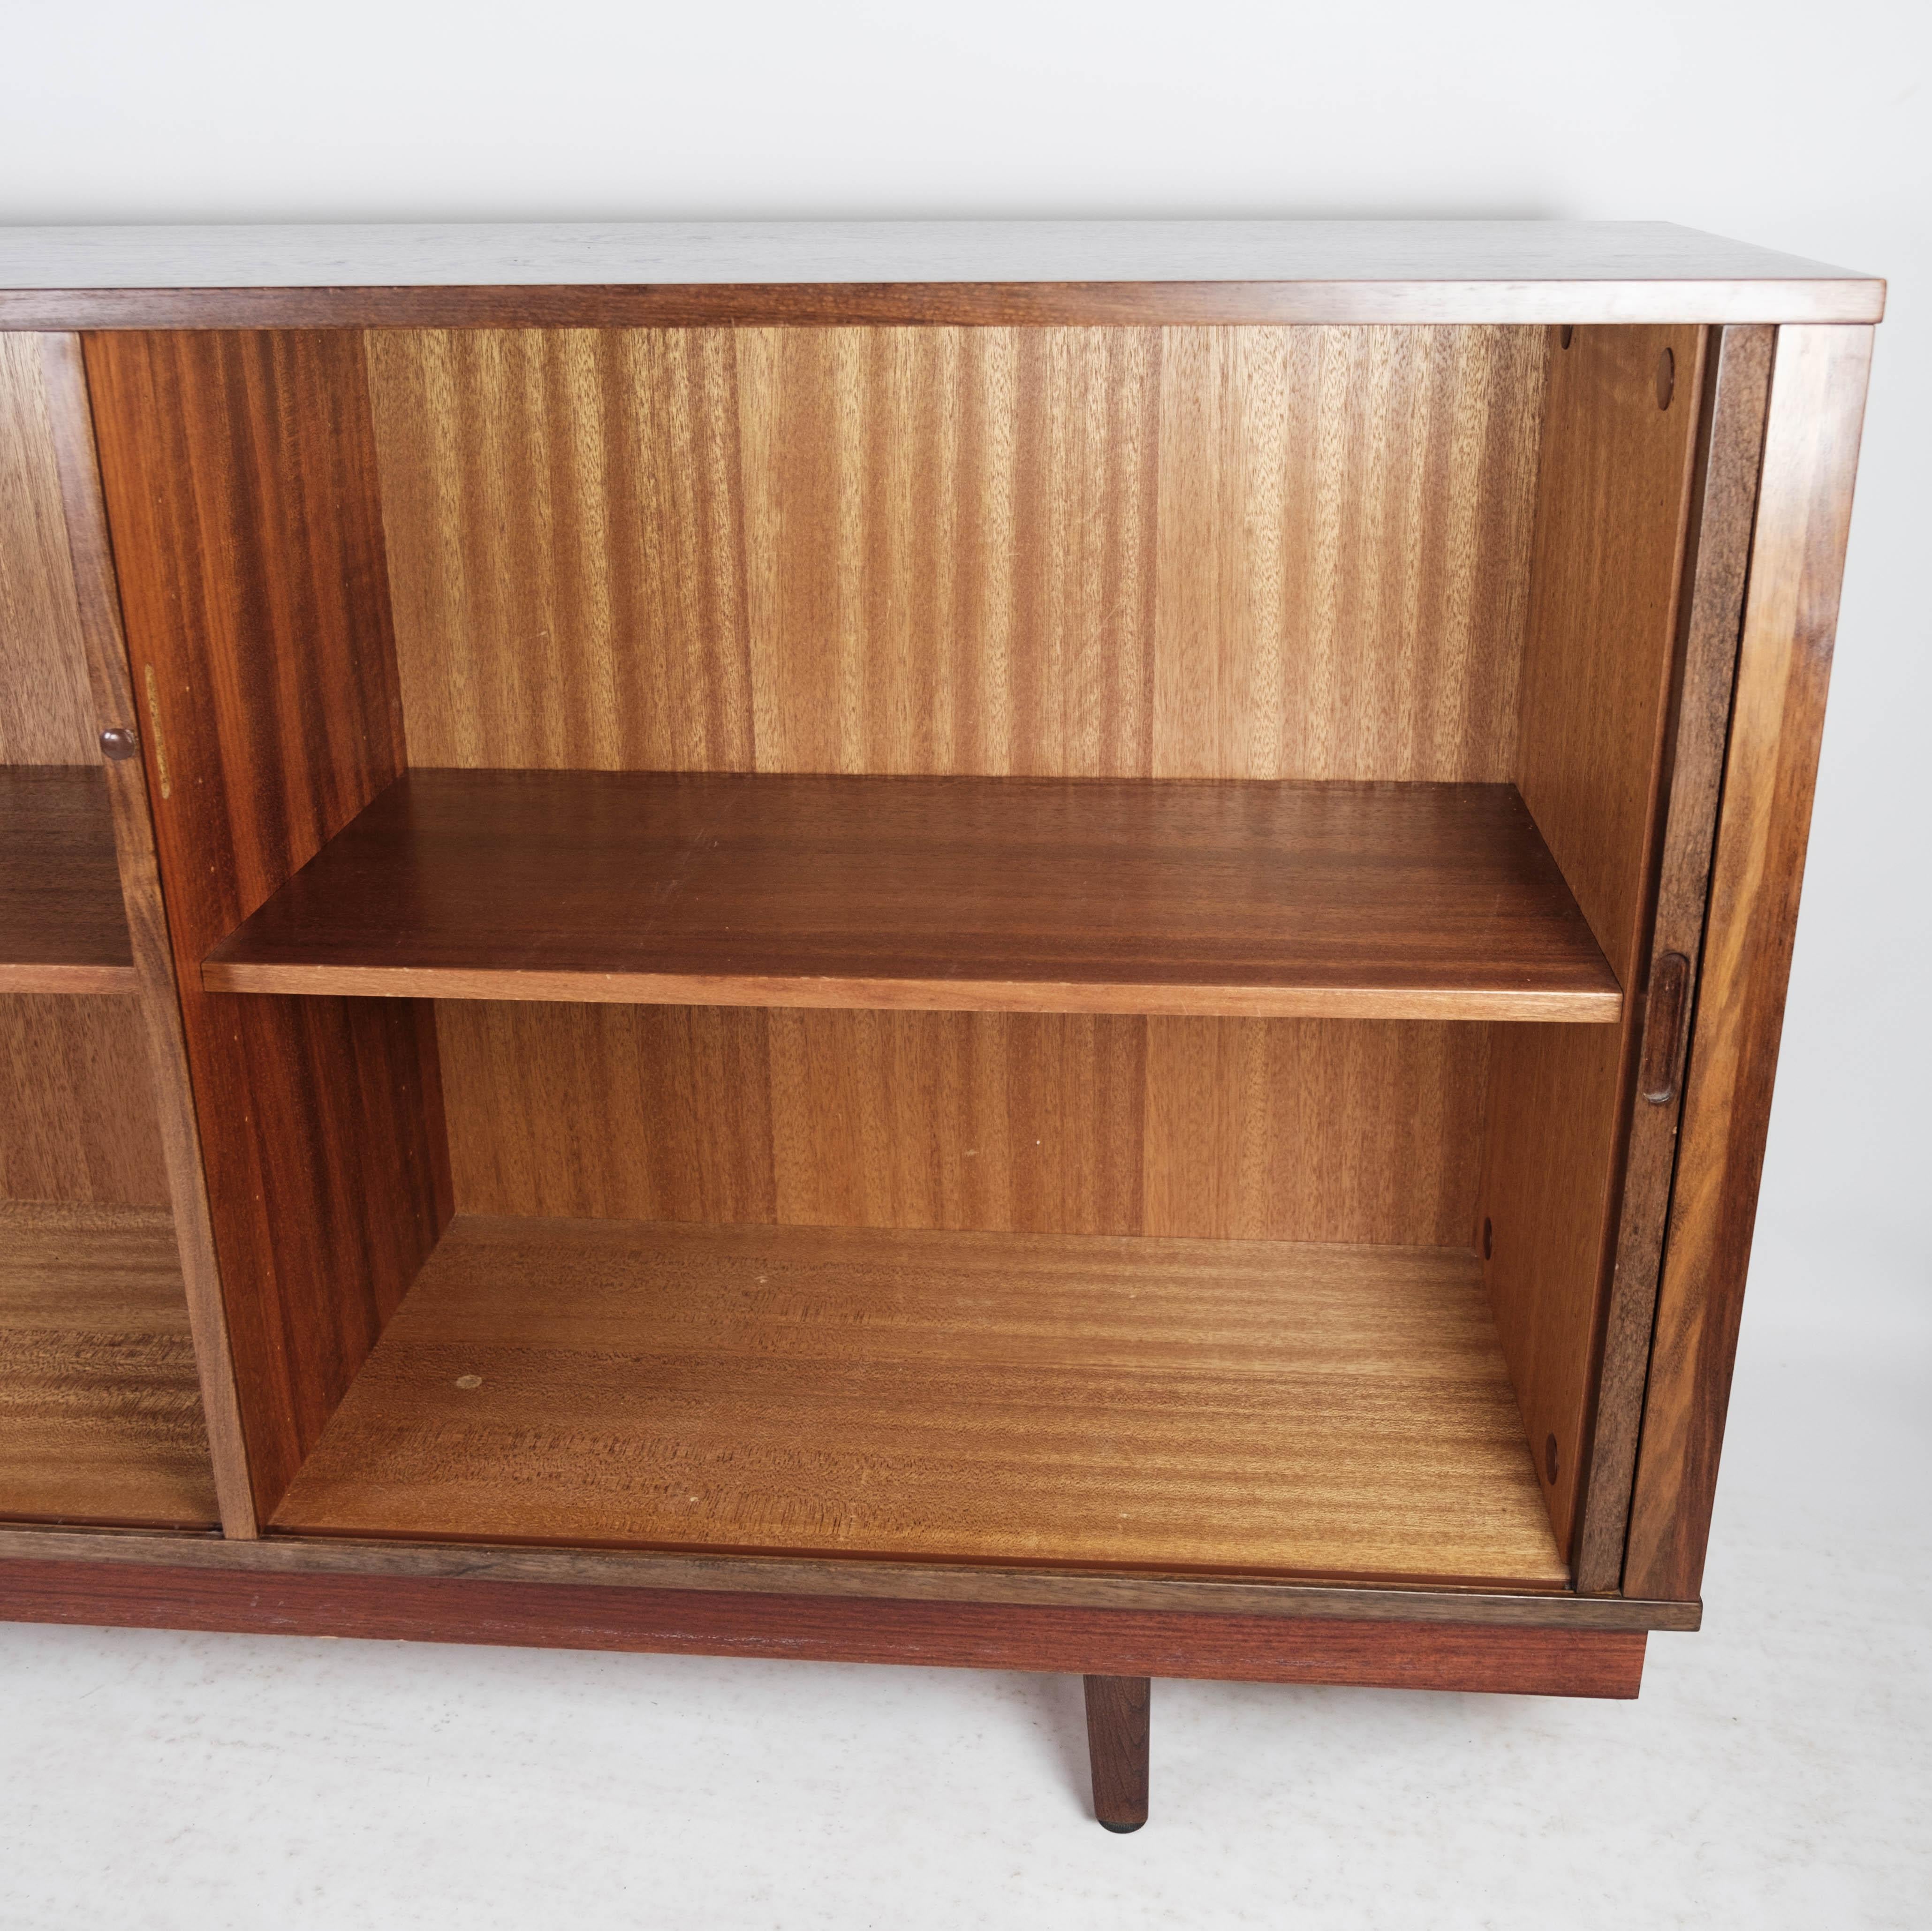 Mid-20th Century Low Sideboard with Sliding Doors in Rosewood of Danish Design from the 1960s